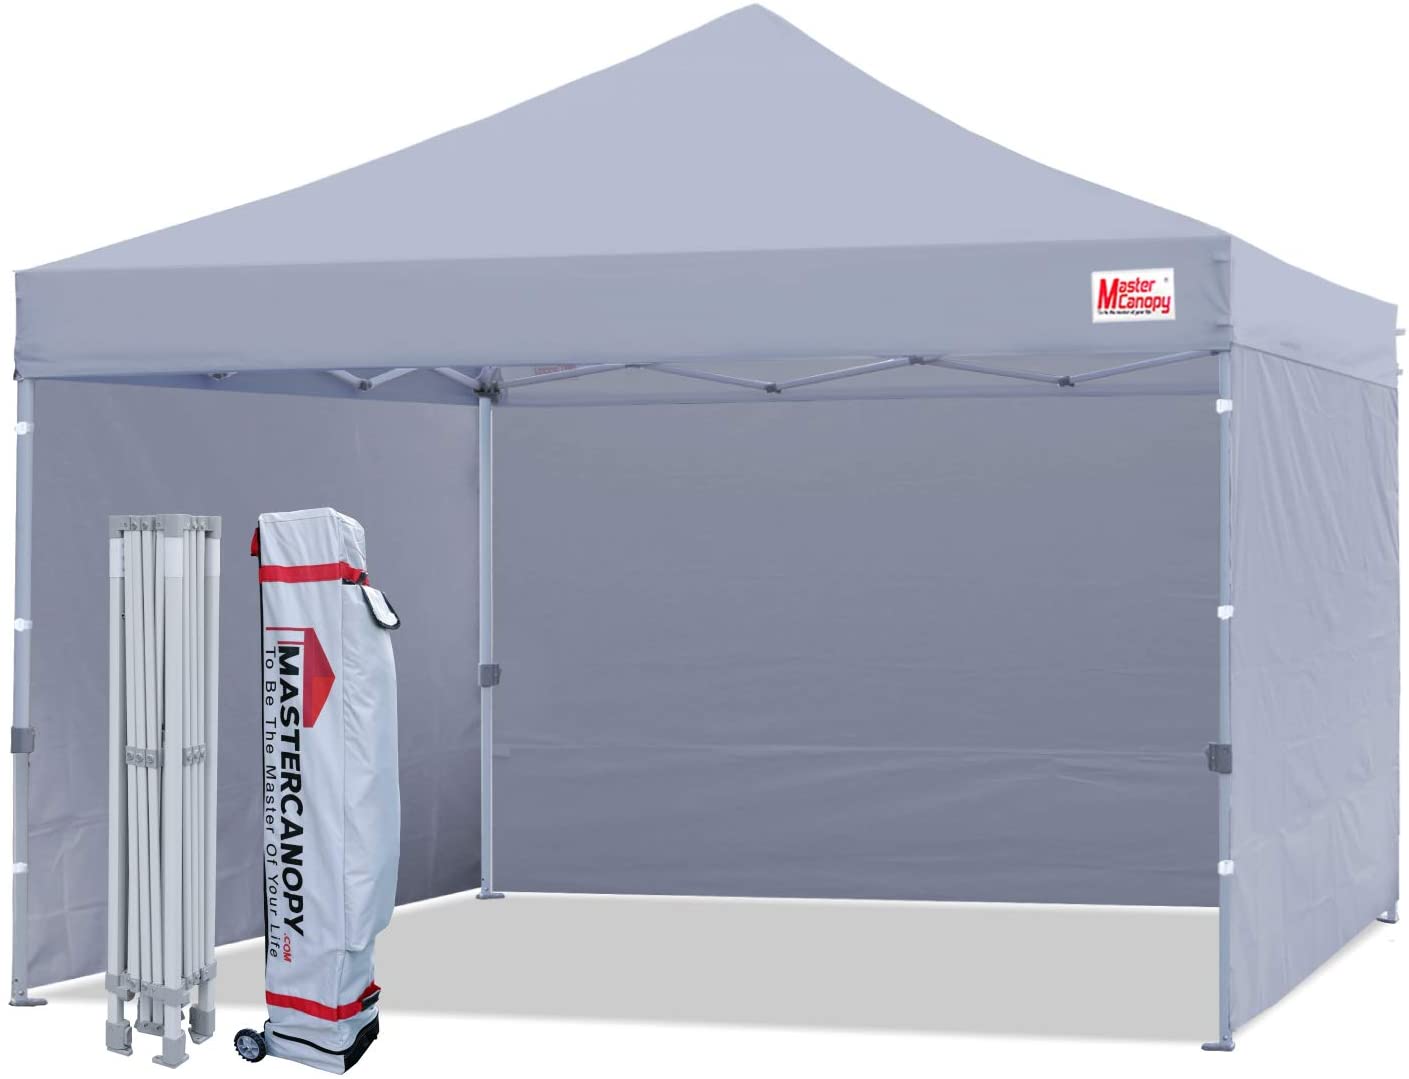 MASTERCANOPY Ez Pop-up Canopy Tent With Removable Sidewalls